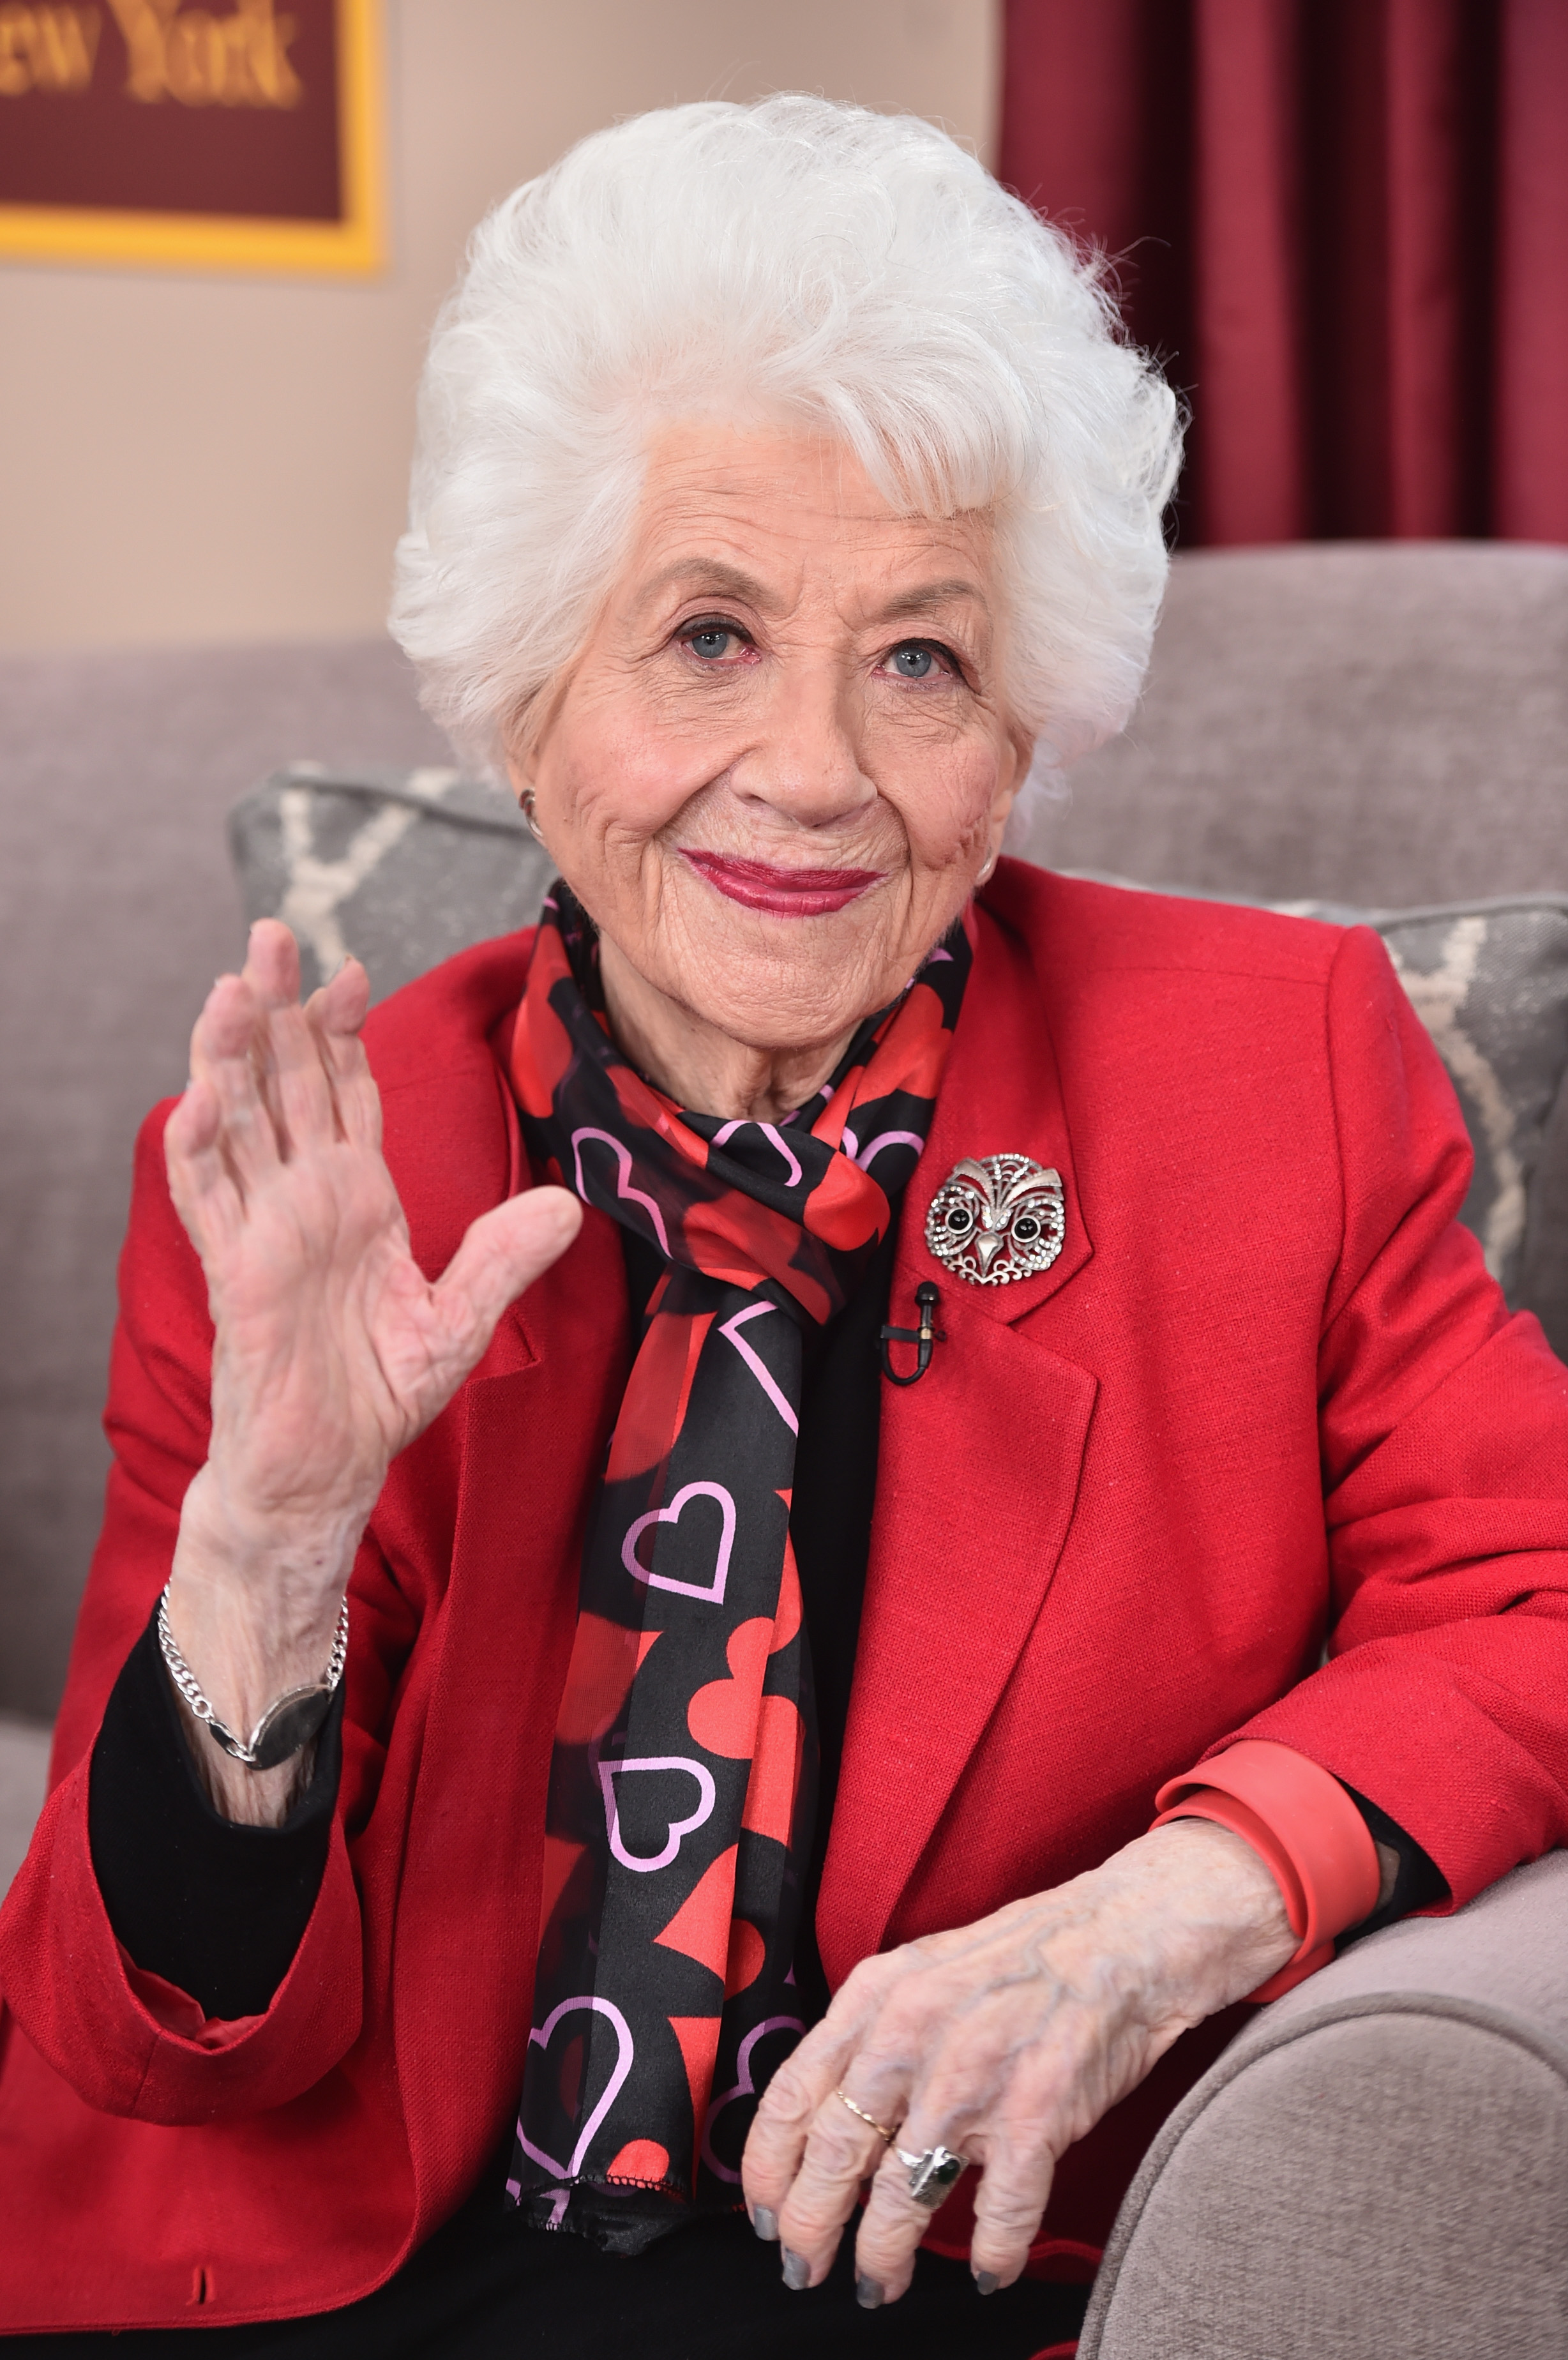 Charlotte Rae at Hallmark's Home and Family "Facts Of Life Reunion" at the Universal Studios Backlot on February 12, 2016 in Universal City, California | Source: Getty Images